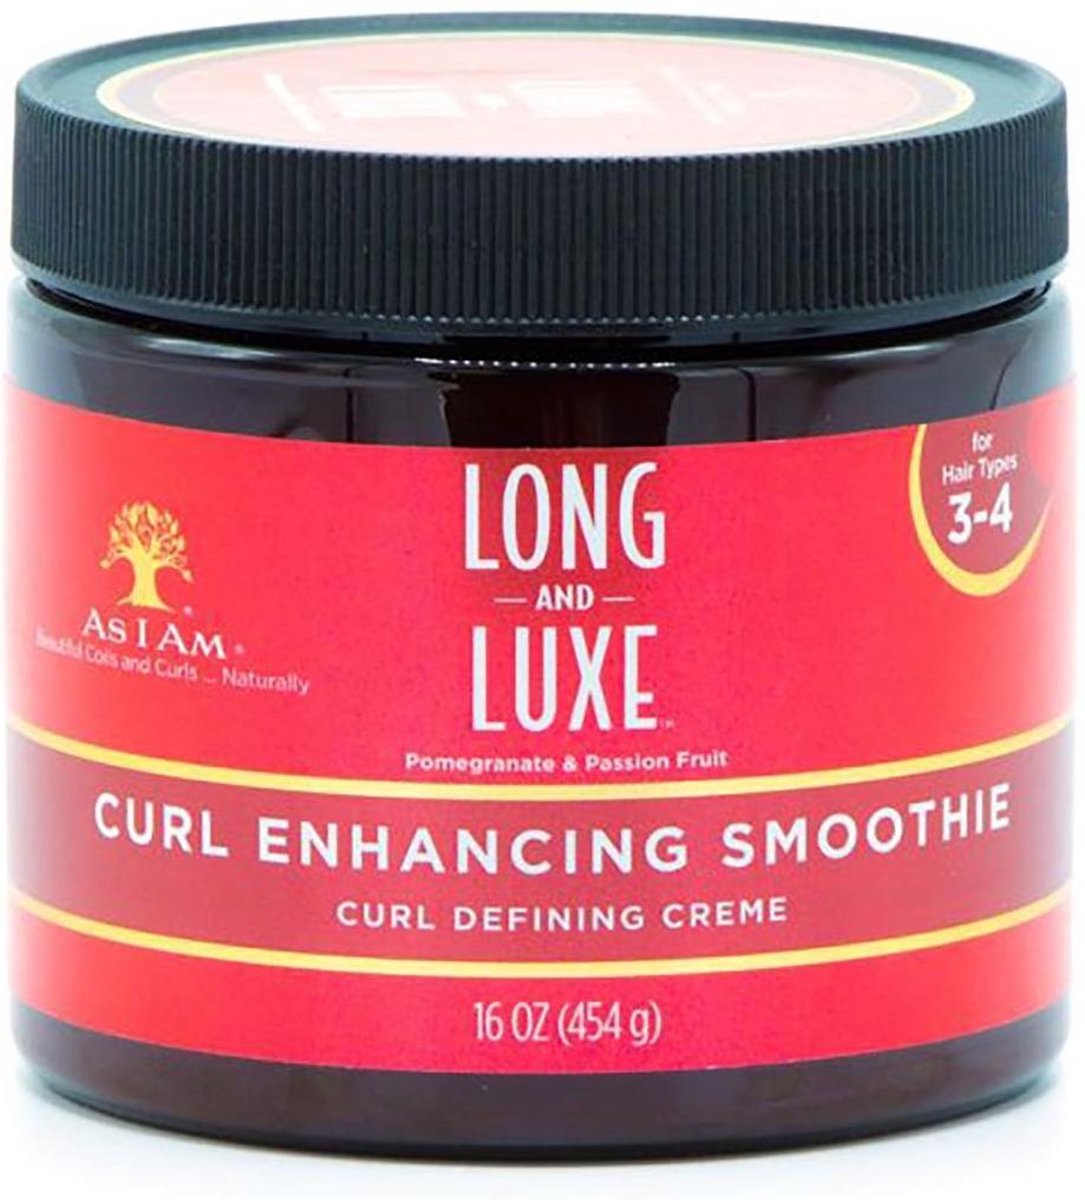 As i Am Long and Luxe Curl Enhancing Smoothie Curl Defining Creme 454gr